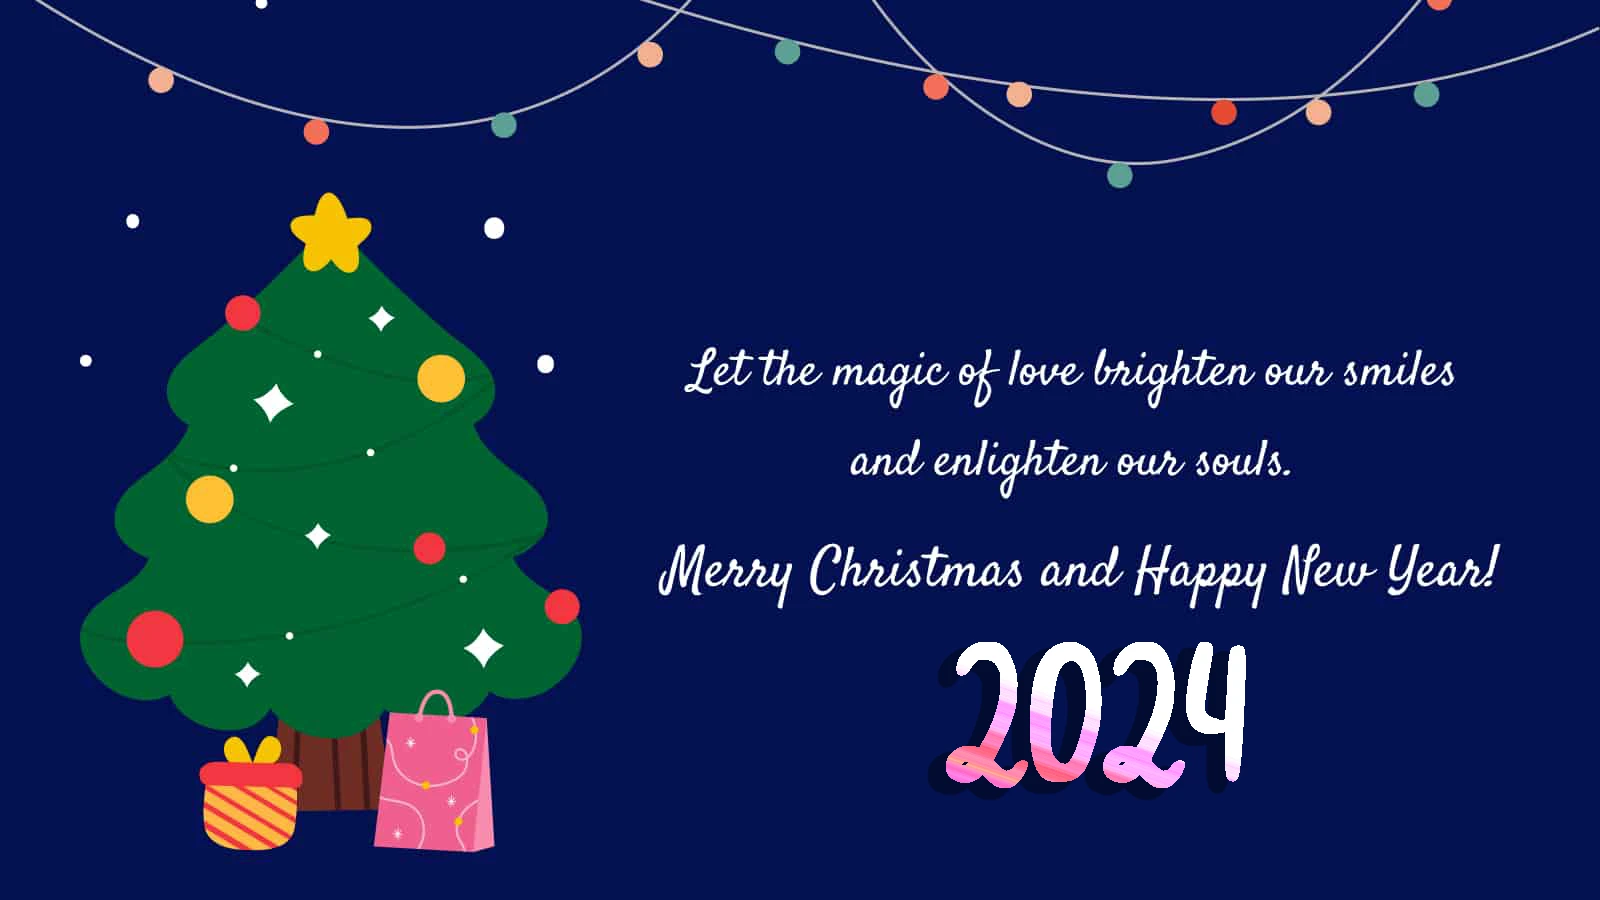 Let the magic of love brighten our smiles and enlighter our souls ^ merry christmas and happy new year